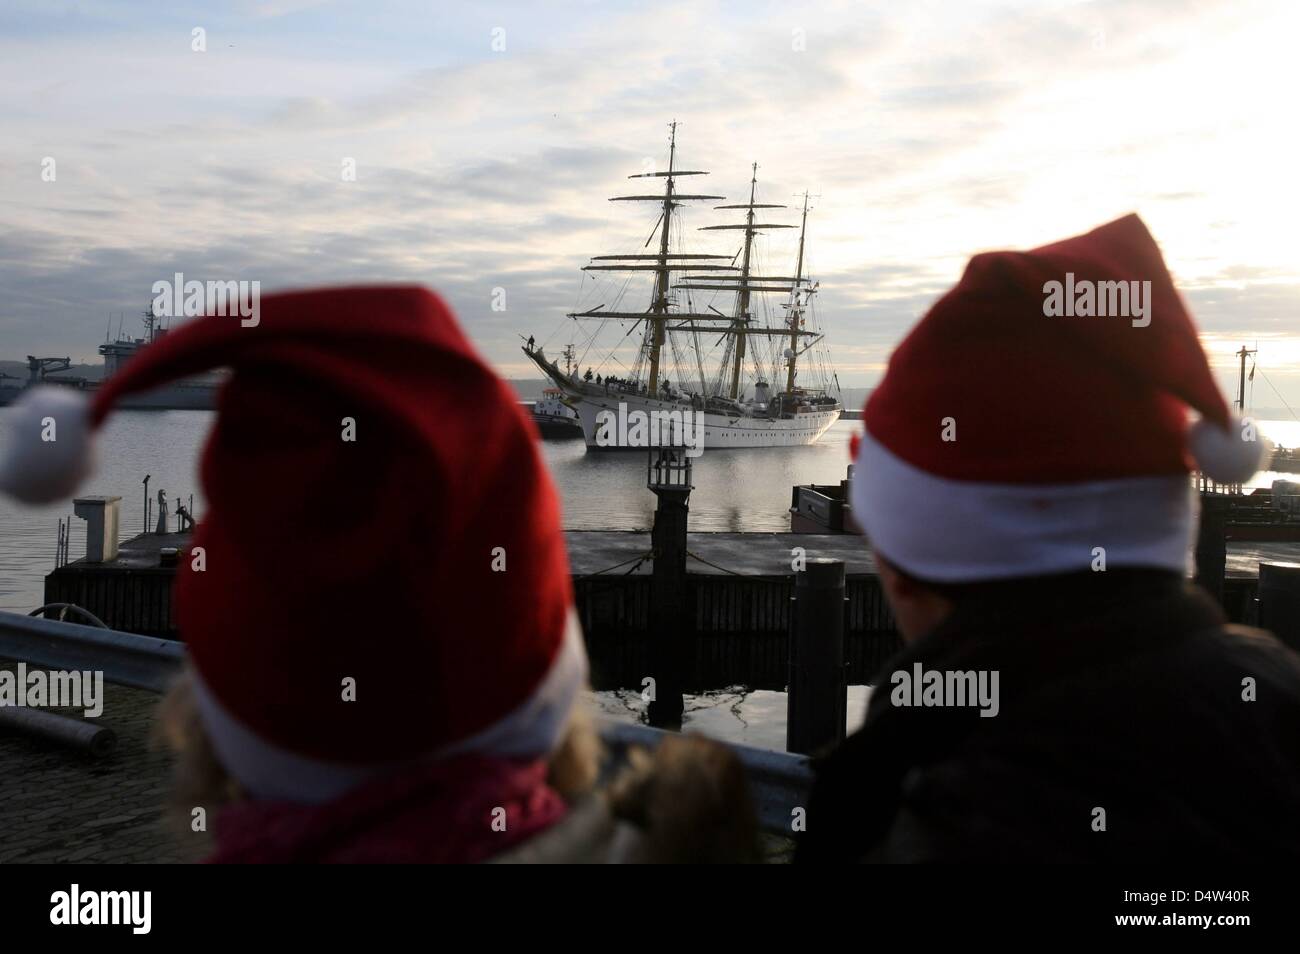 Germany's navy sailing school ship 'Gorch Fock' returns to its home harbour in Kiel, Germany, 15 December 2009. Gorch Fock returned after a journey of 112 days and 13.000 nautical miles, her longest ever autumn 'cruise'. Alltogether 267 cadets completed their basic training in three shifts. Photo: CARSTEN REHDER Stock Photo